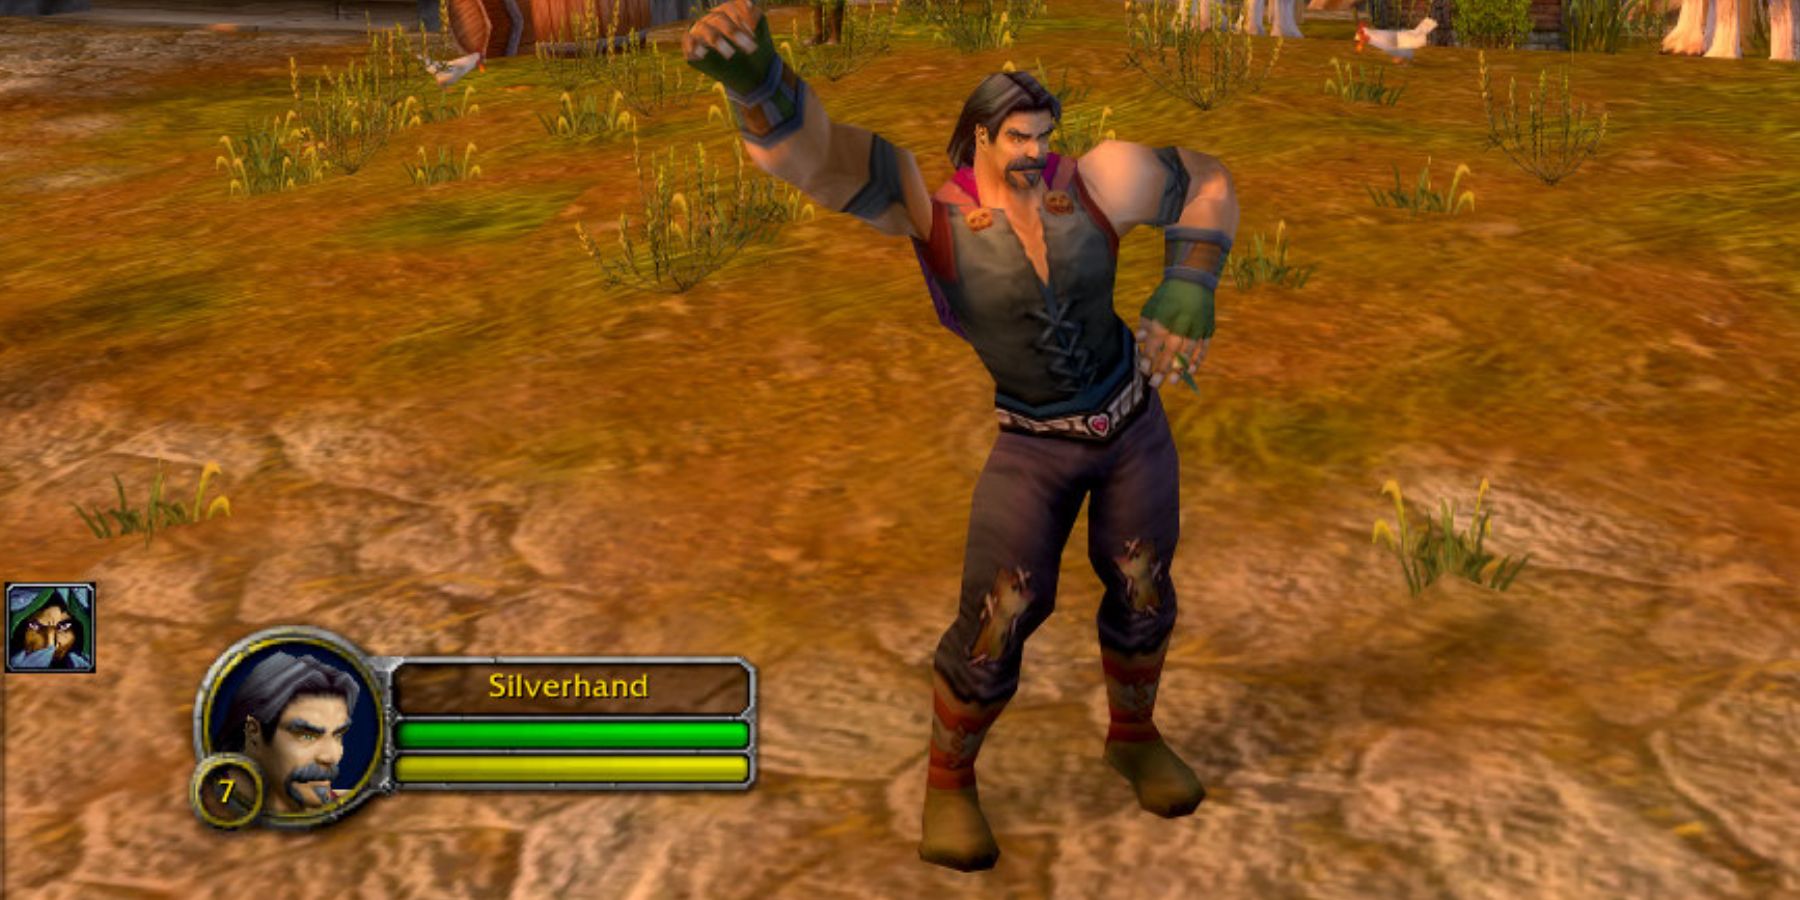 https://static0.gamerantimages.com/wordpress/wp-content/uploads/2023/12/world-of-warcraft-season-of-discovery-wow-sod-max-level-cap-silverhand-rogue.jpg